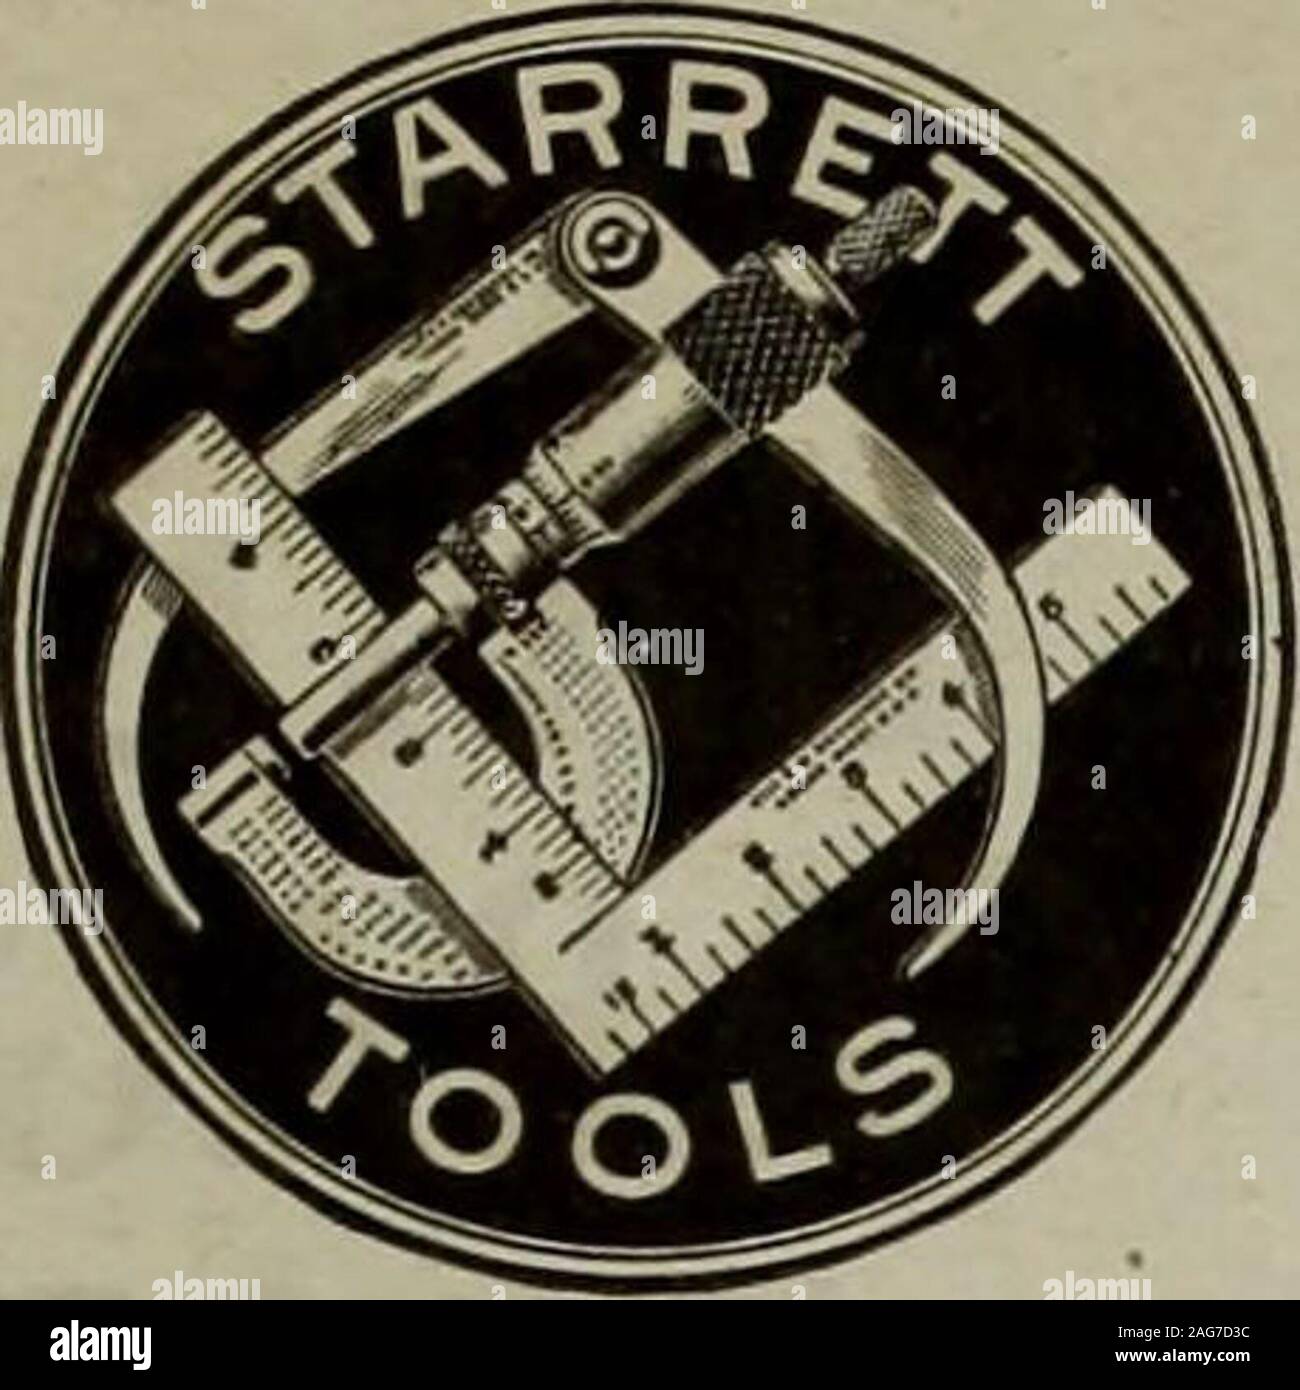 . Hardware merchandising March-June 1917. // interested, tear out this page and keep with letters to be answered. June 2, 1917 HARDWARE AND METAL. nmmimmtmimmmtmtmnmHmmsHmHmiB The L. S. Starrett Co. , The Worlds GreatestToolmakers Athol, Mass. HERE is the most useful measur-ing instrument which machinistsneed in laying out their work. Itis an easy tool to sell because of thecomplicated layouts which are con-stantly arising nowadays in metalmanufacturing. Because of its variety of uses, mosttool-makers and machinists want the Stafreft • »* »i hi en. Surface Gage for scribing lines on the work. Stock Photo